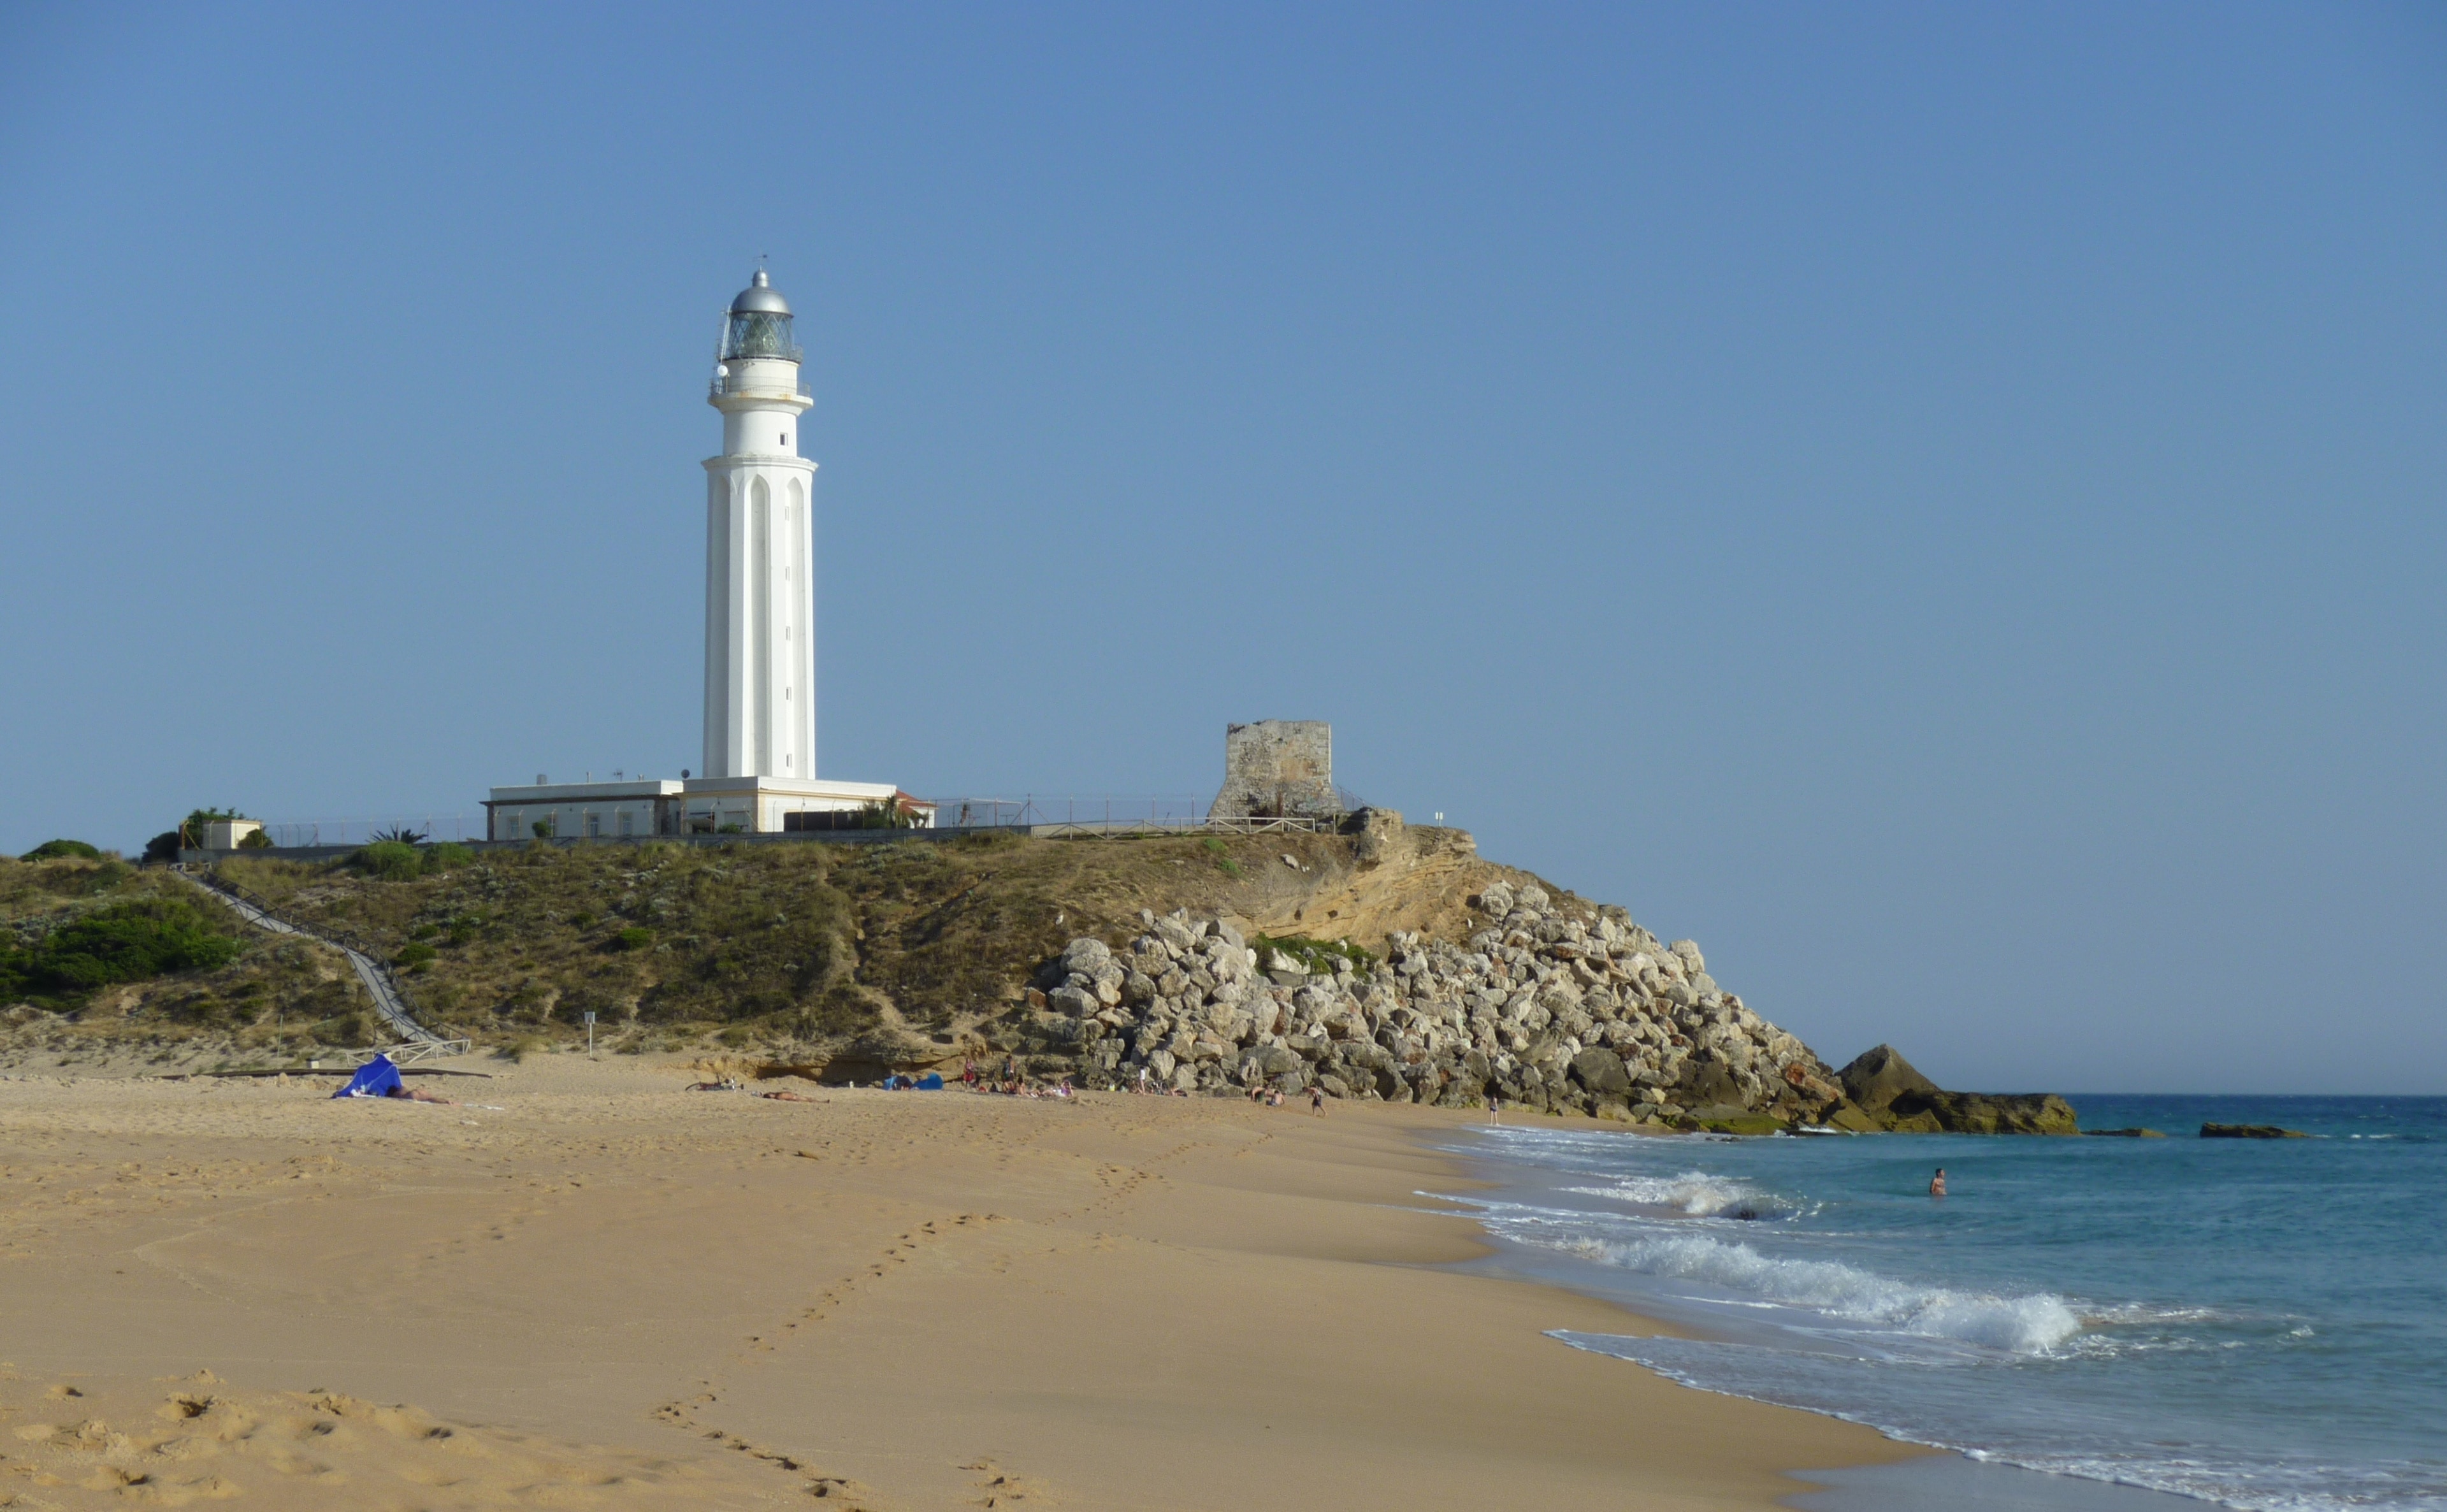 The lighthouse and the arab watchtower on Cape Trafalgar